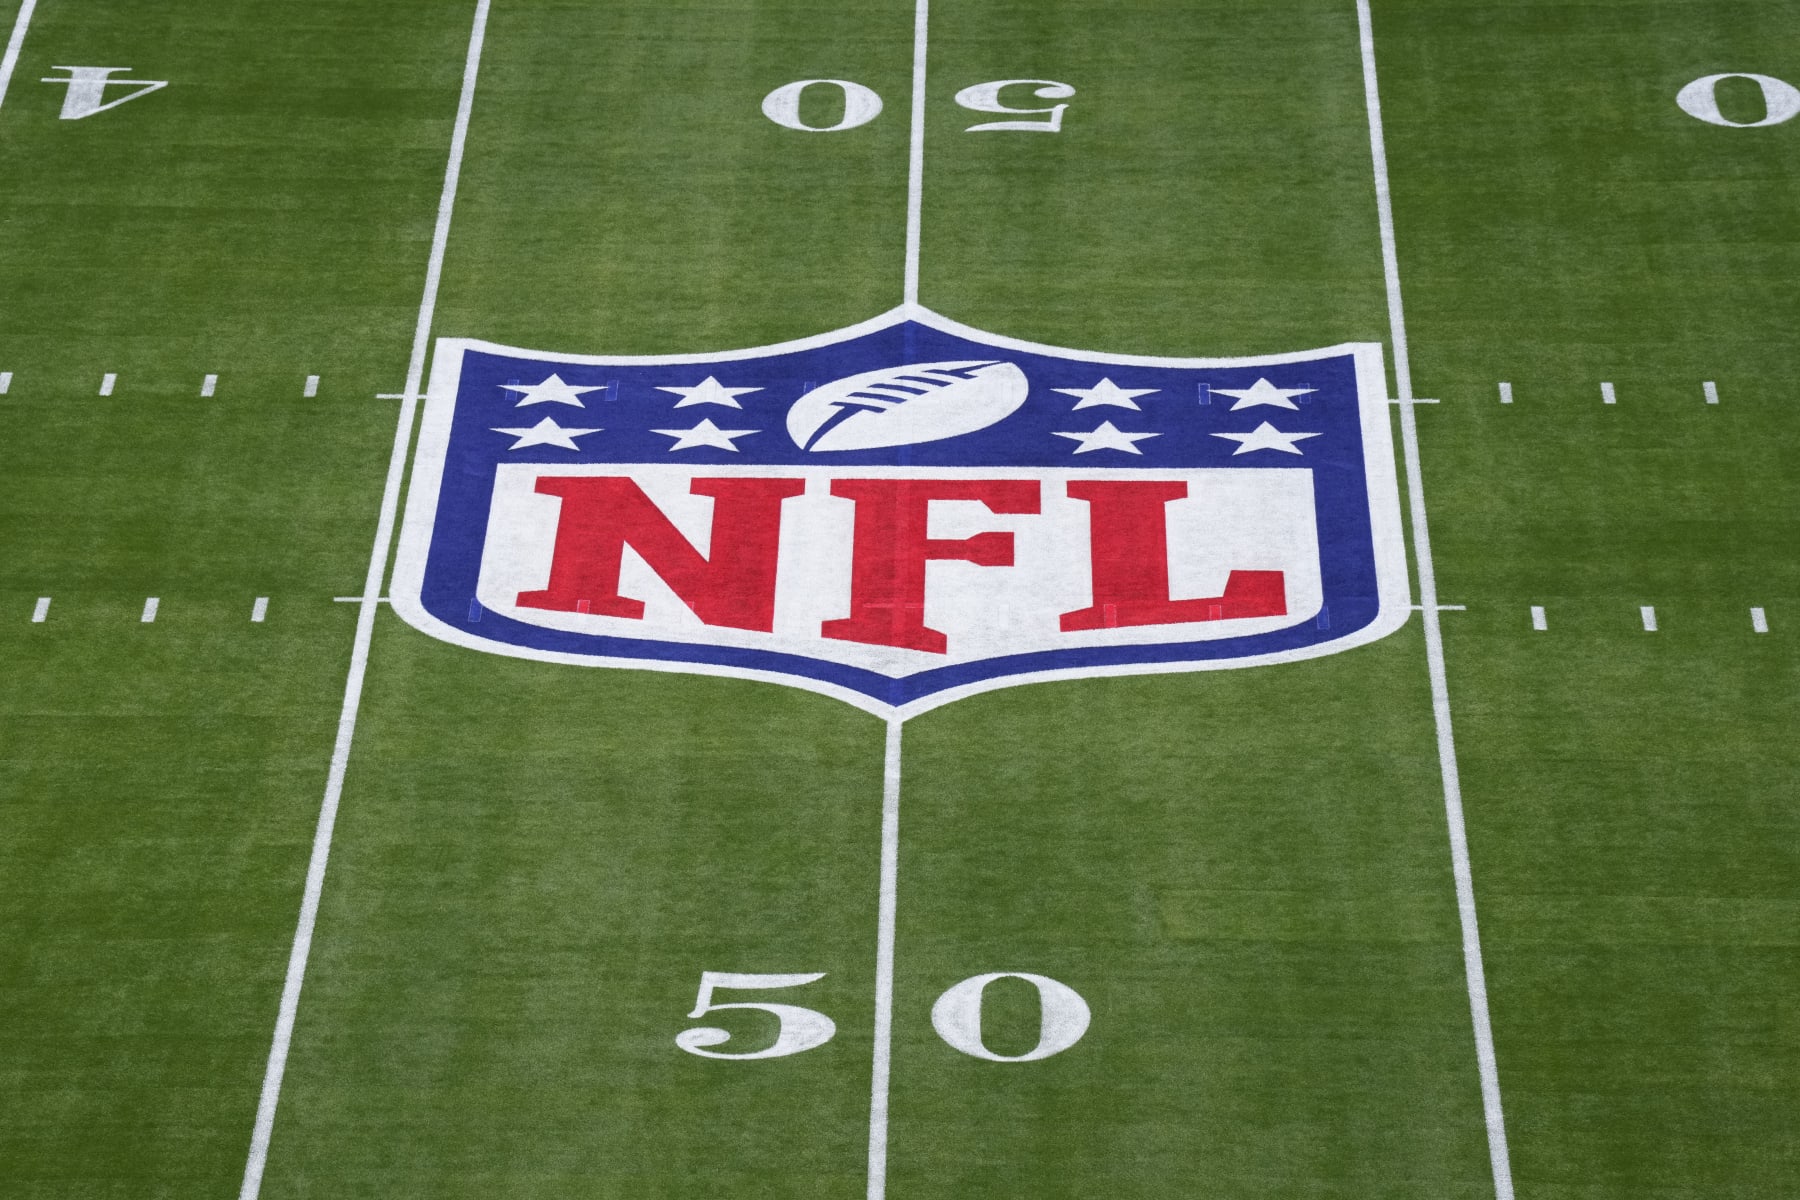 The 'Thursday Night Football' flex proposal is a reminder the NFL is a  business - Sports Illustrated